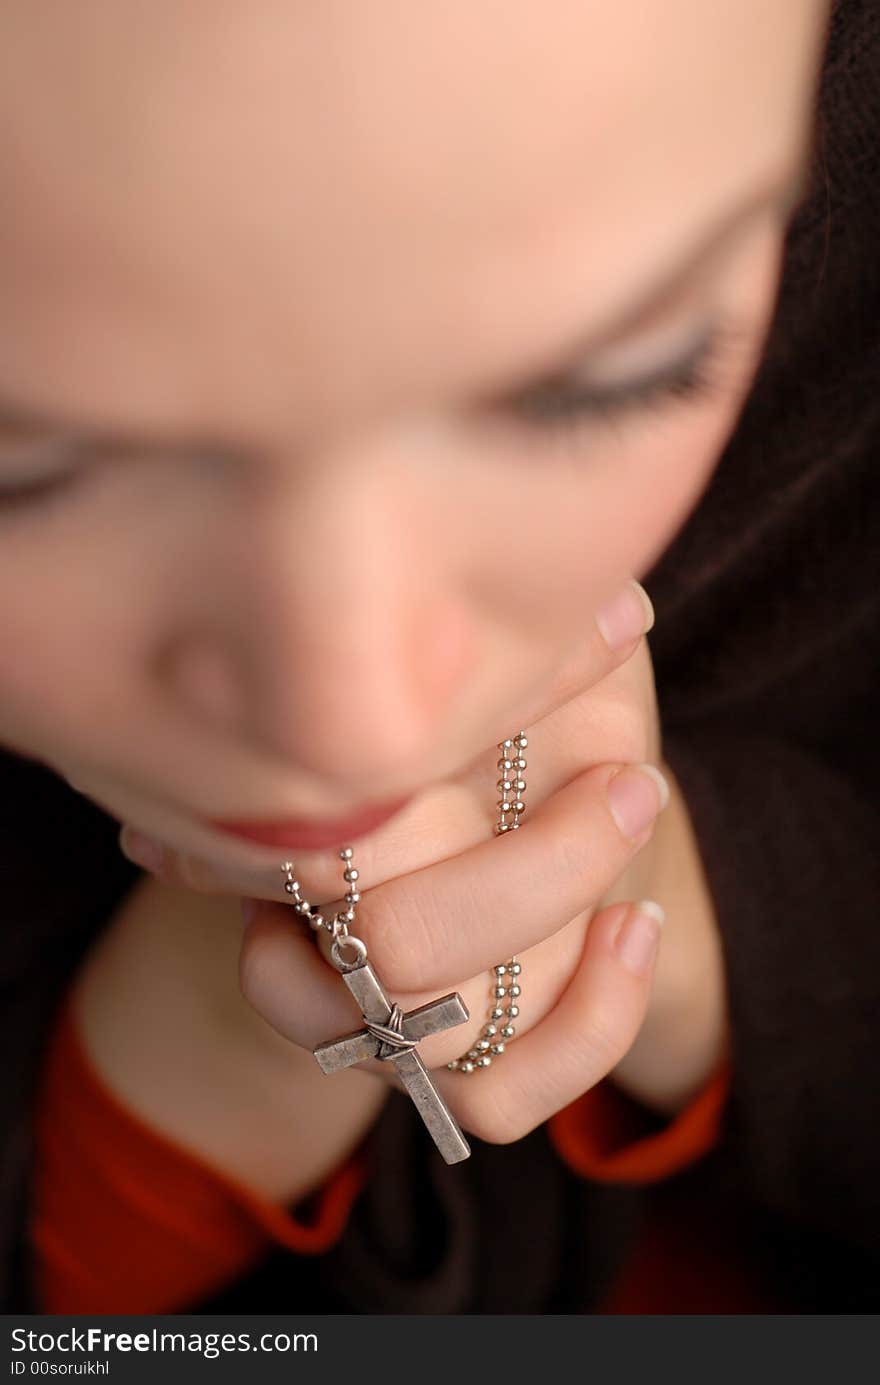 A woman is praying to god with hope(focus is on the cross). A woman is praying to god with hope(focus is on the cross)